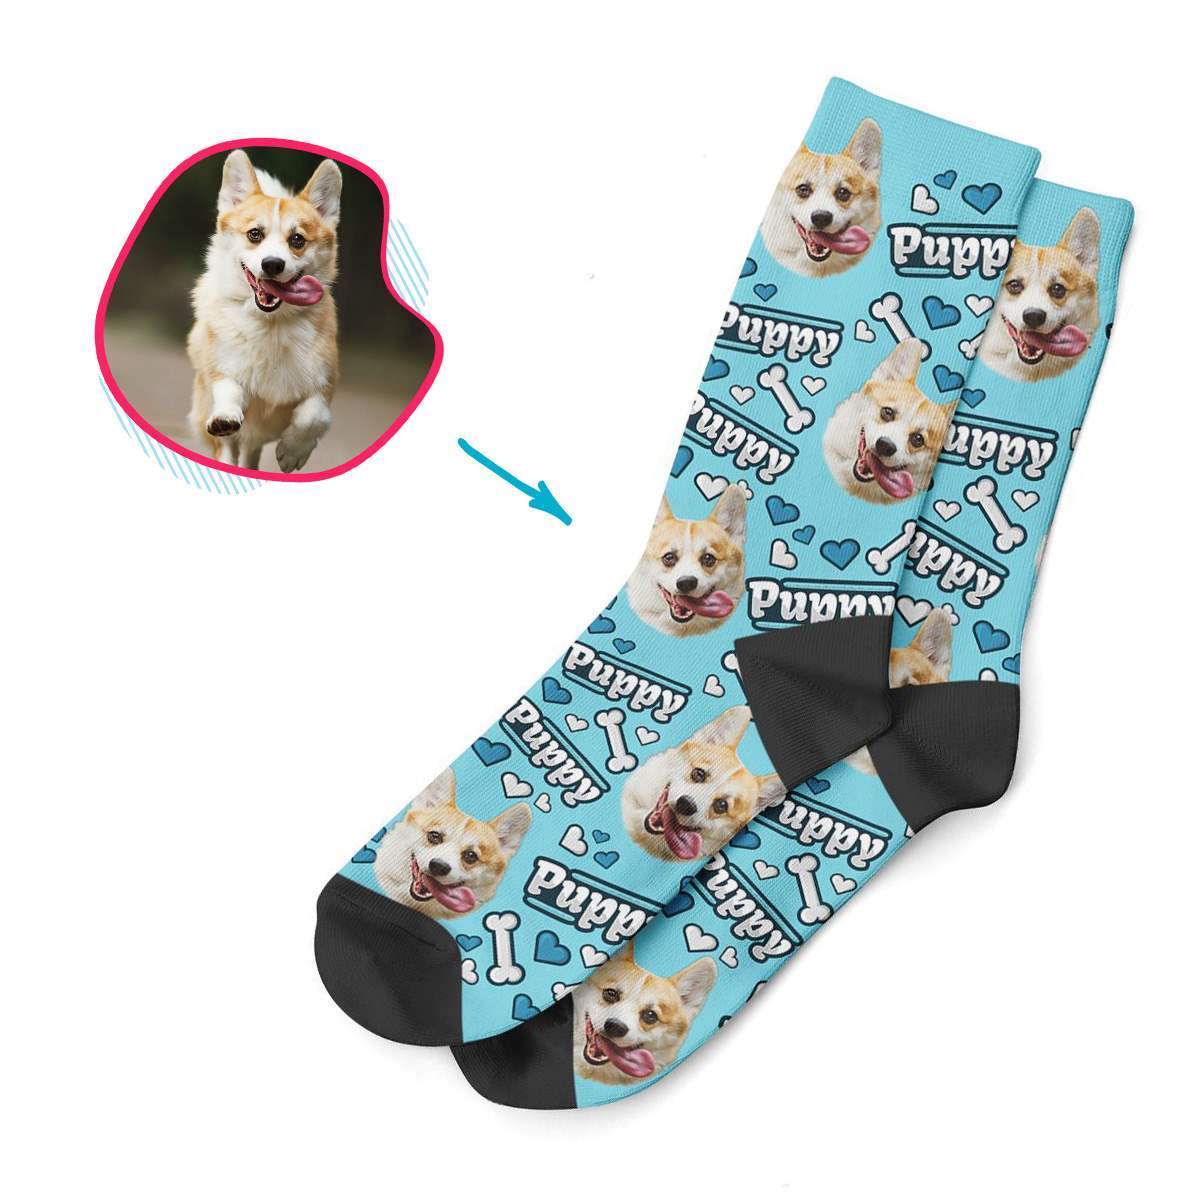 blue Puppy socks personalized with photo of face printed on them